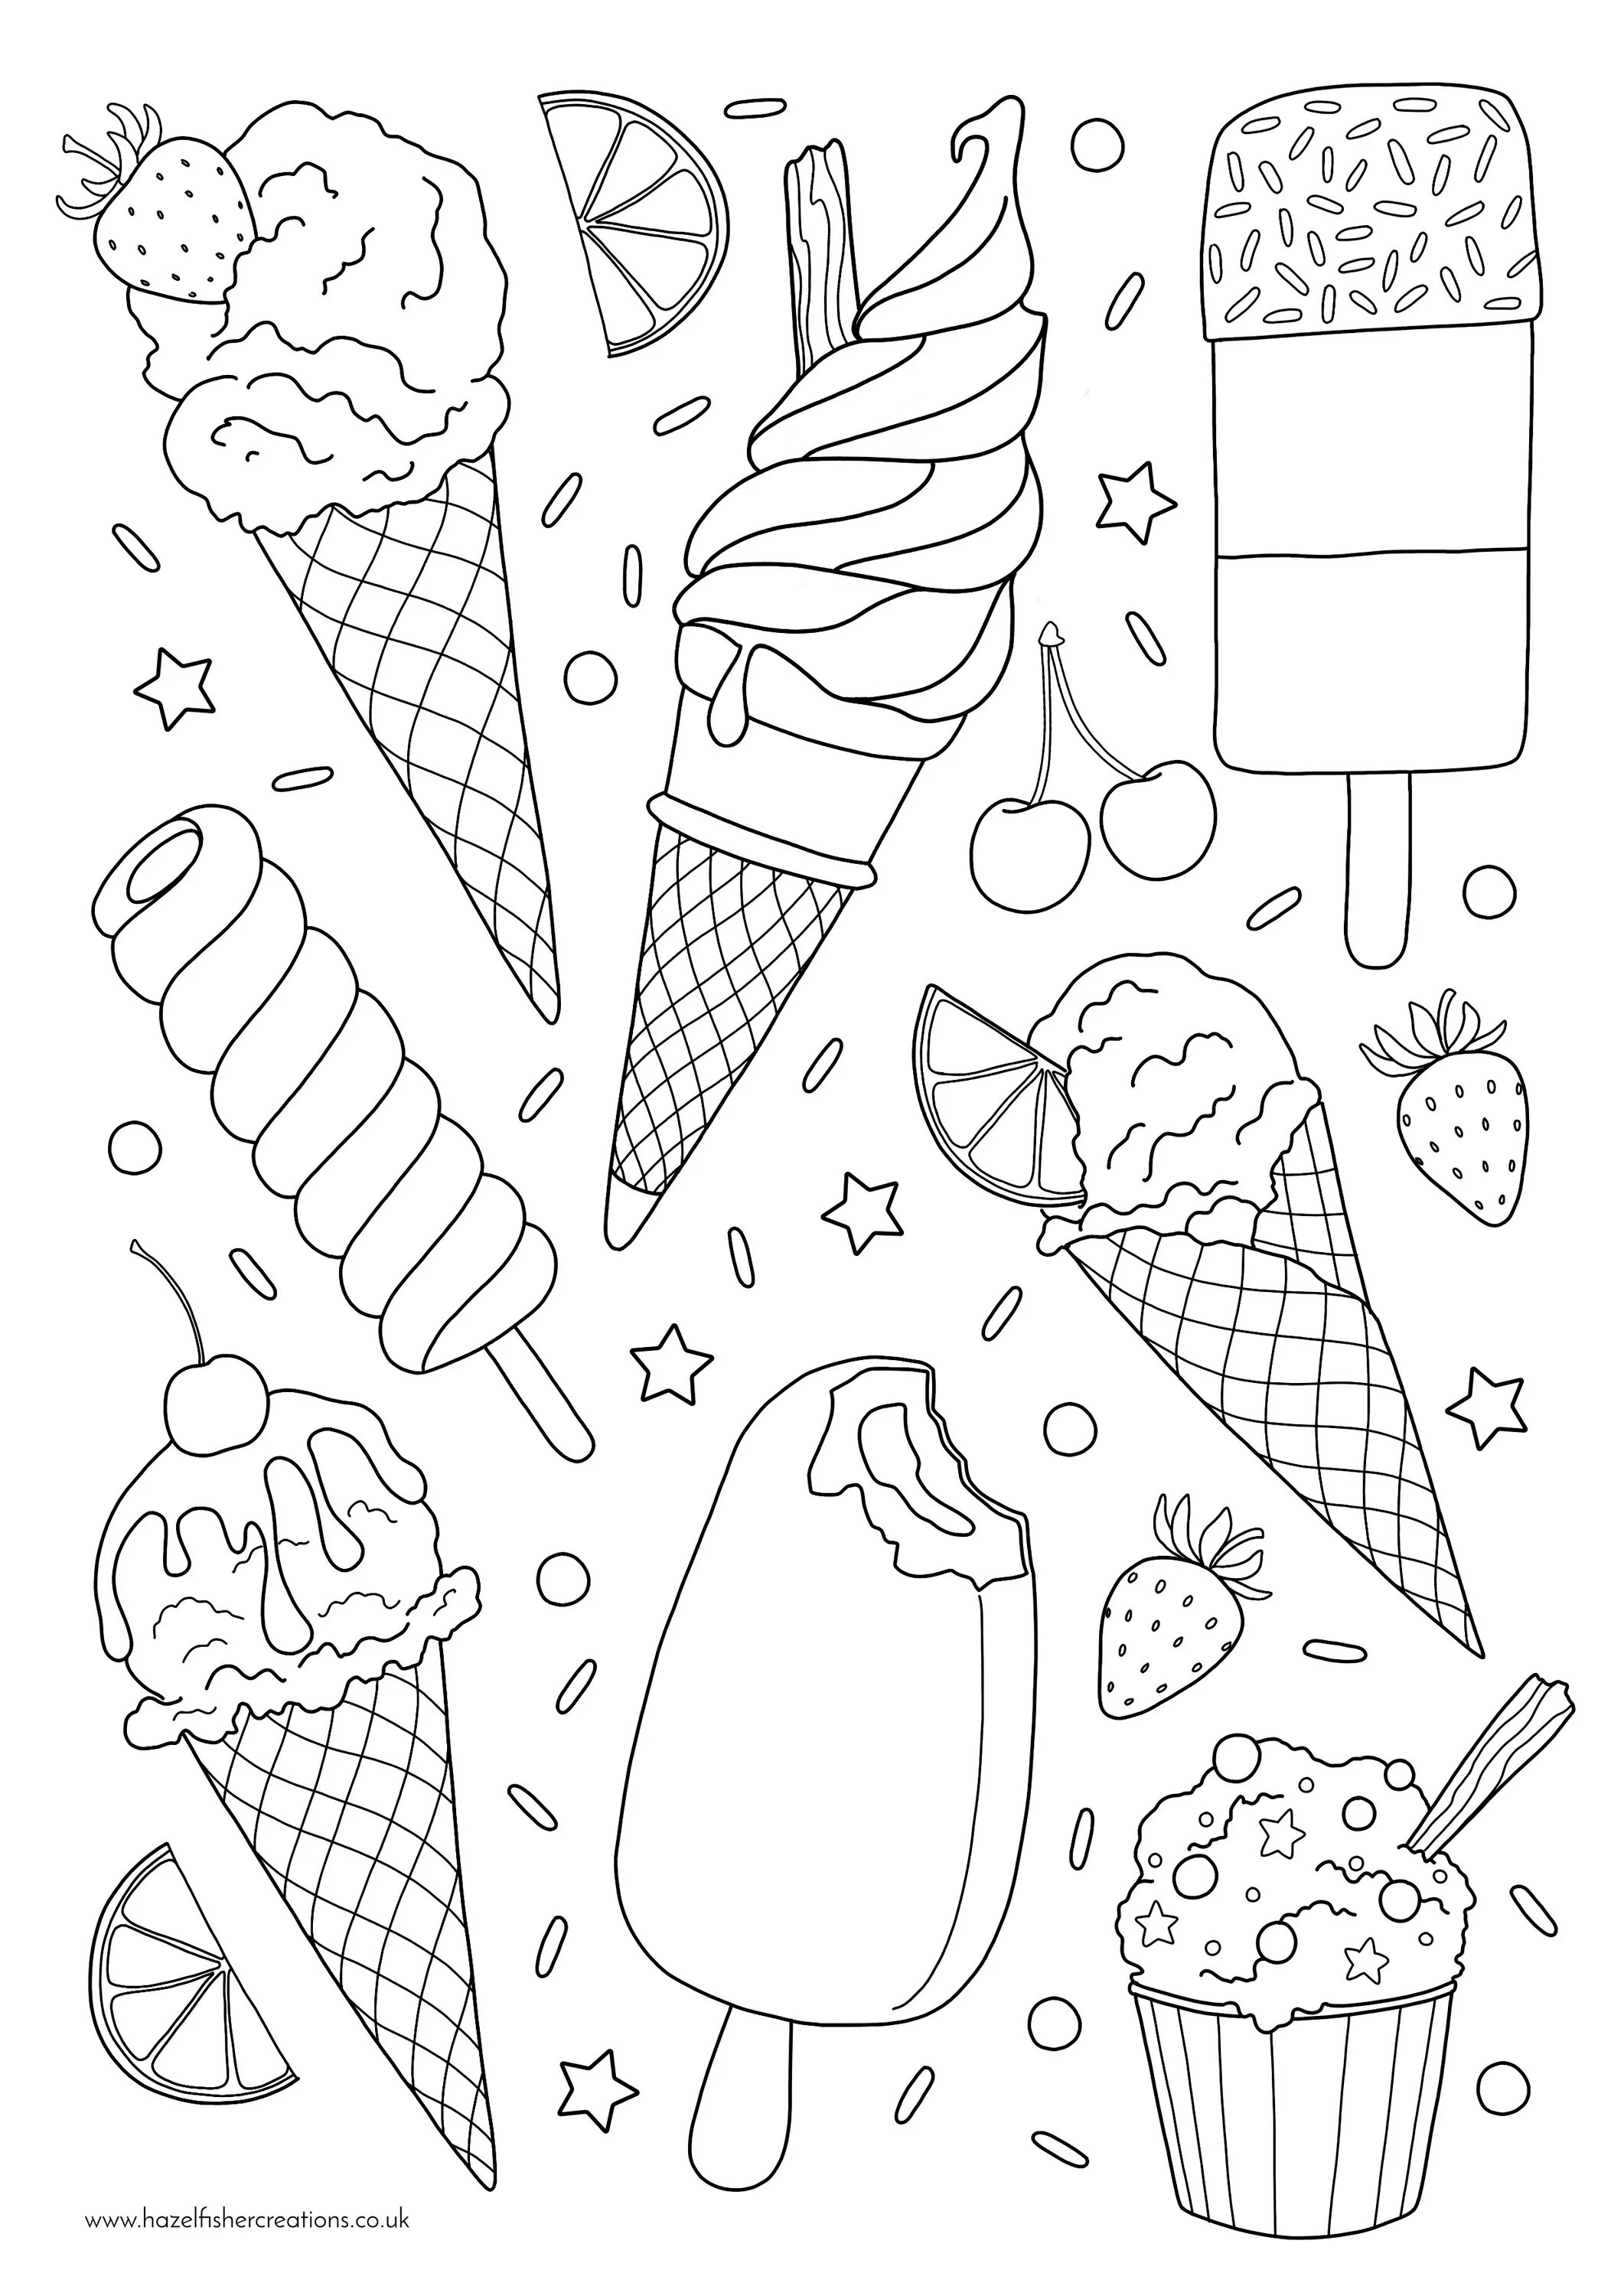 Gourmet anti-stress ice cream coloring page